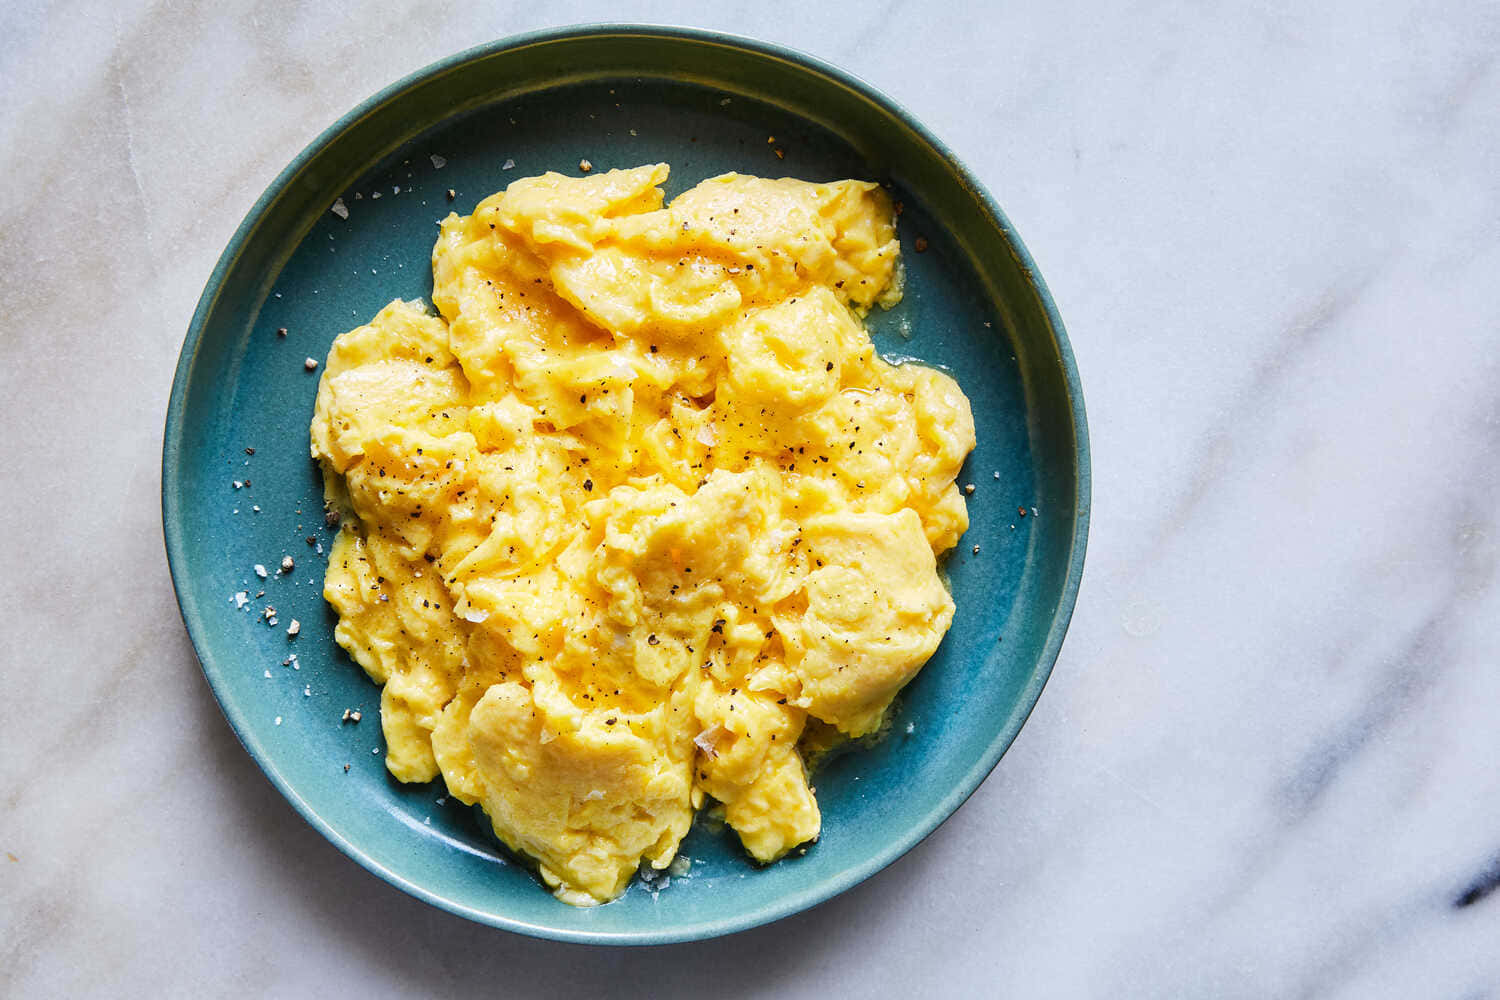 The Perfect Morning Start: A Bowl of Scrambled Eggs